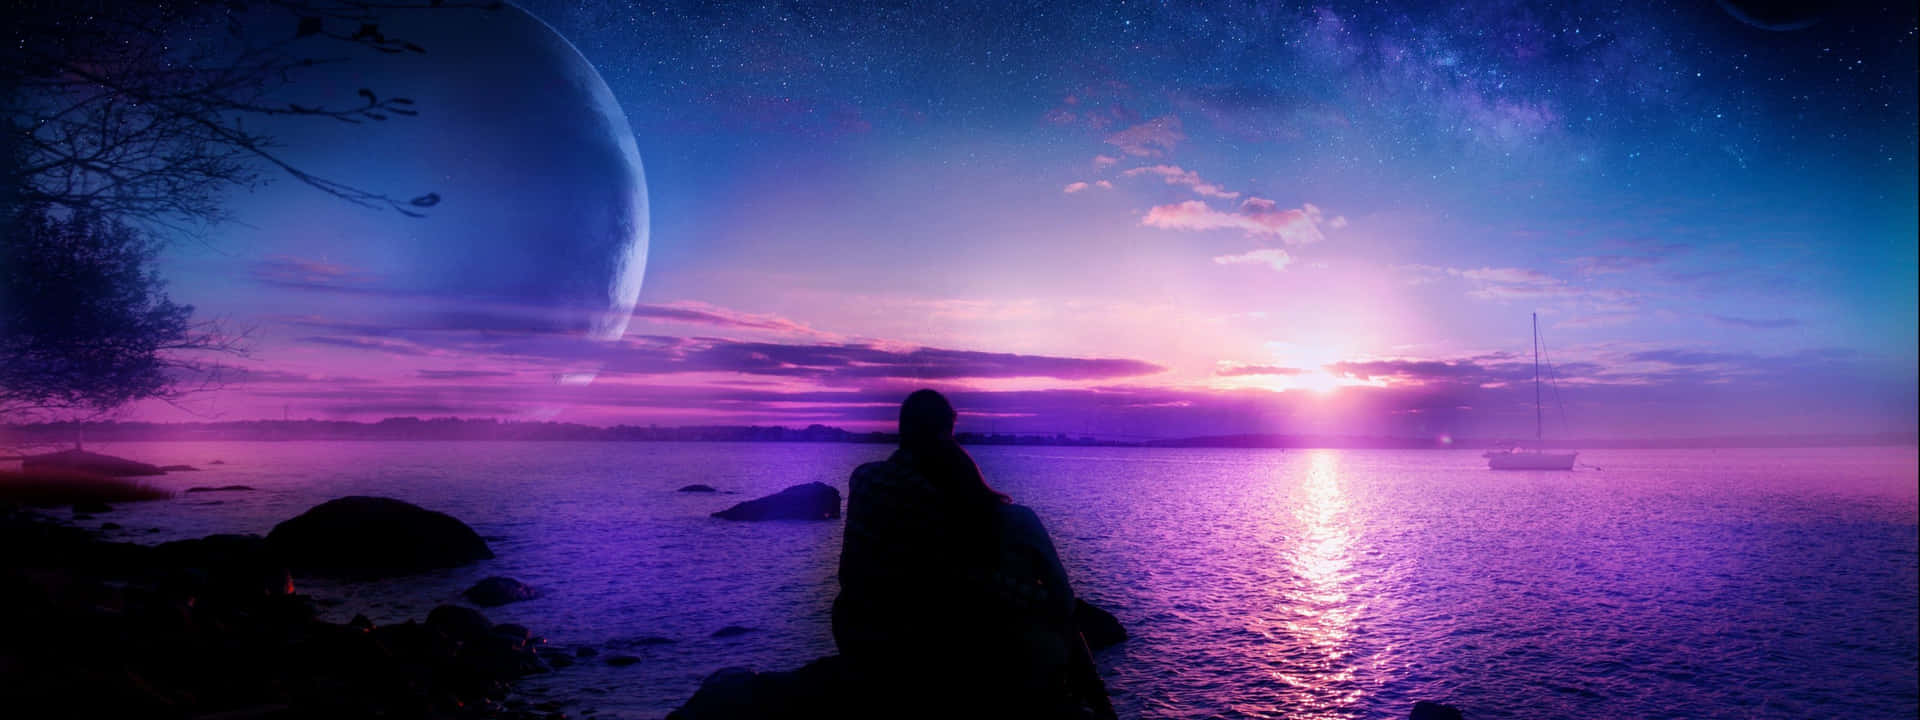 Download A Purple Sky With A Moon And Stars Wallpaper